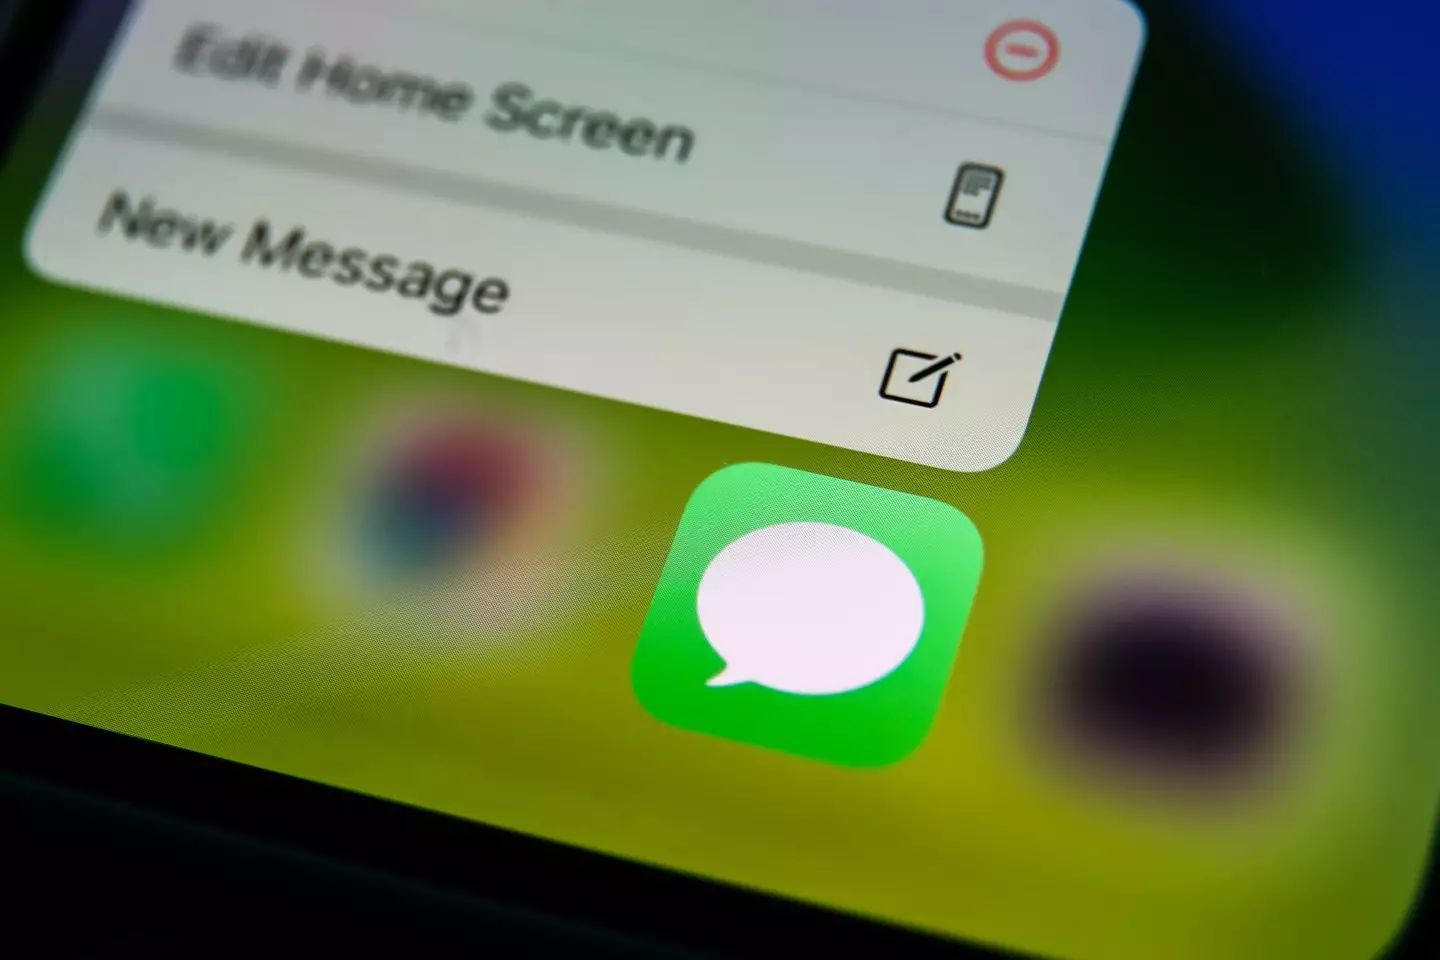 Apple is working on becoming more open with other messaging platforms.